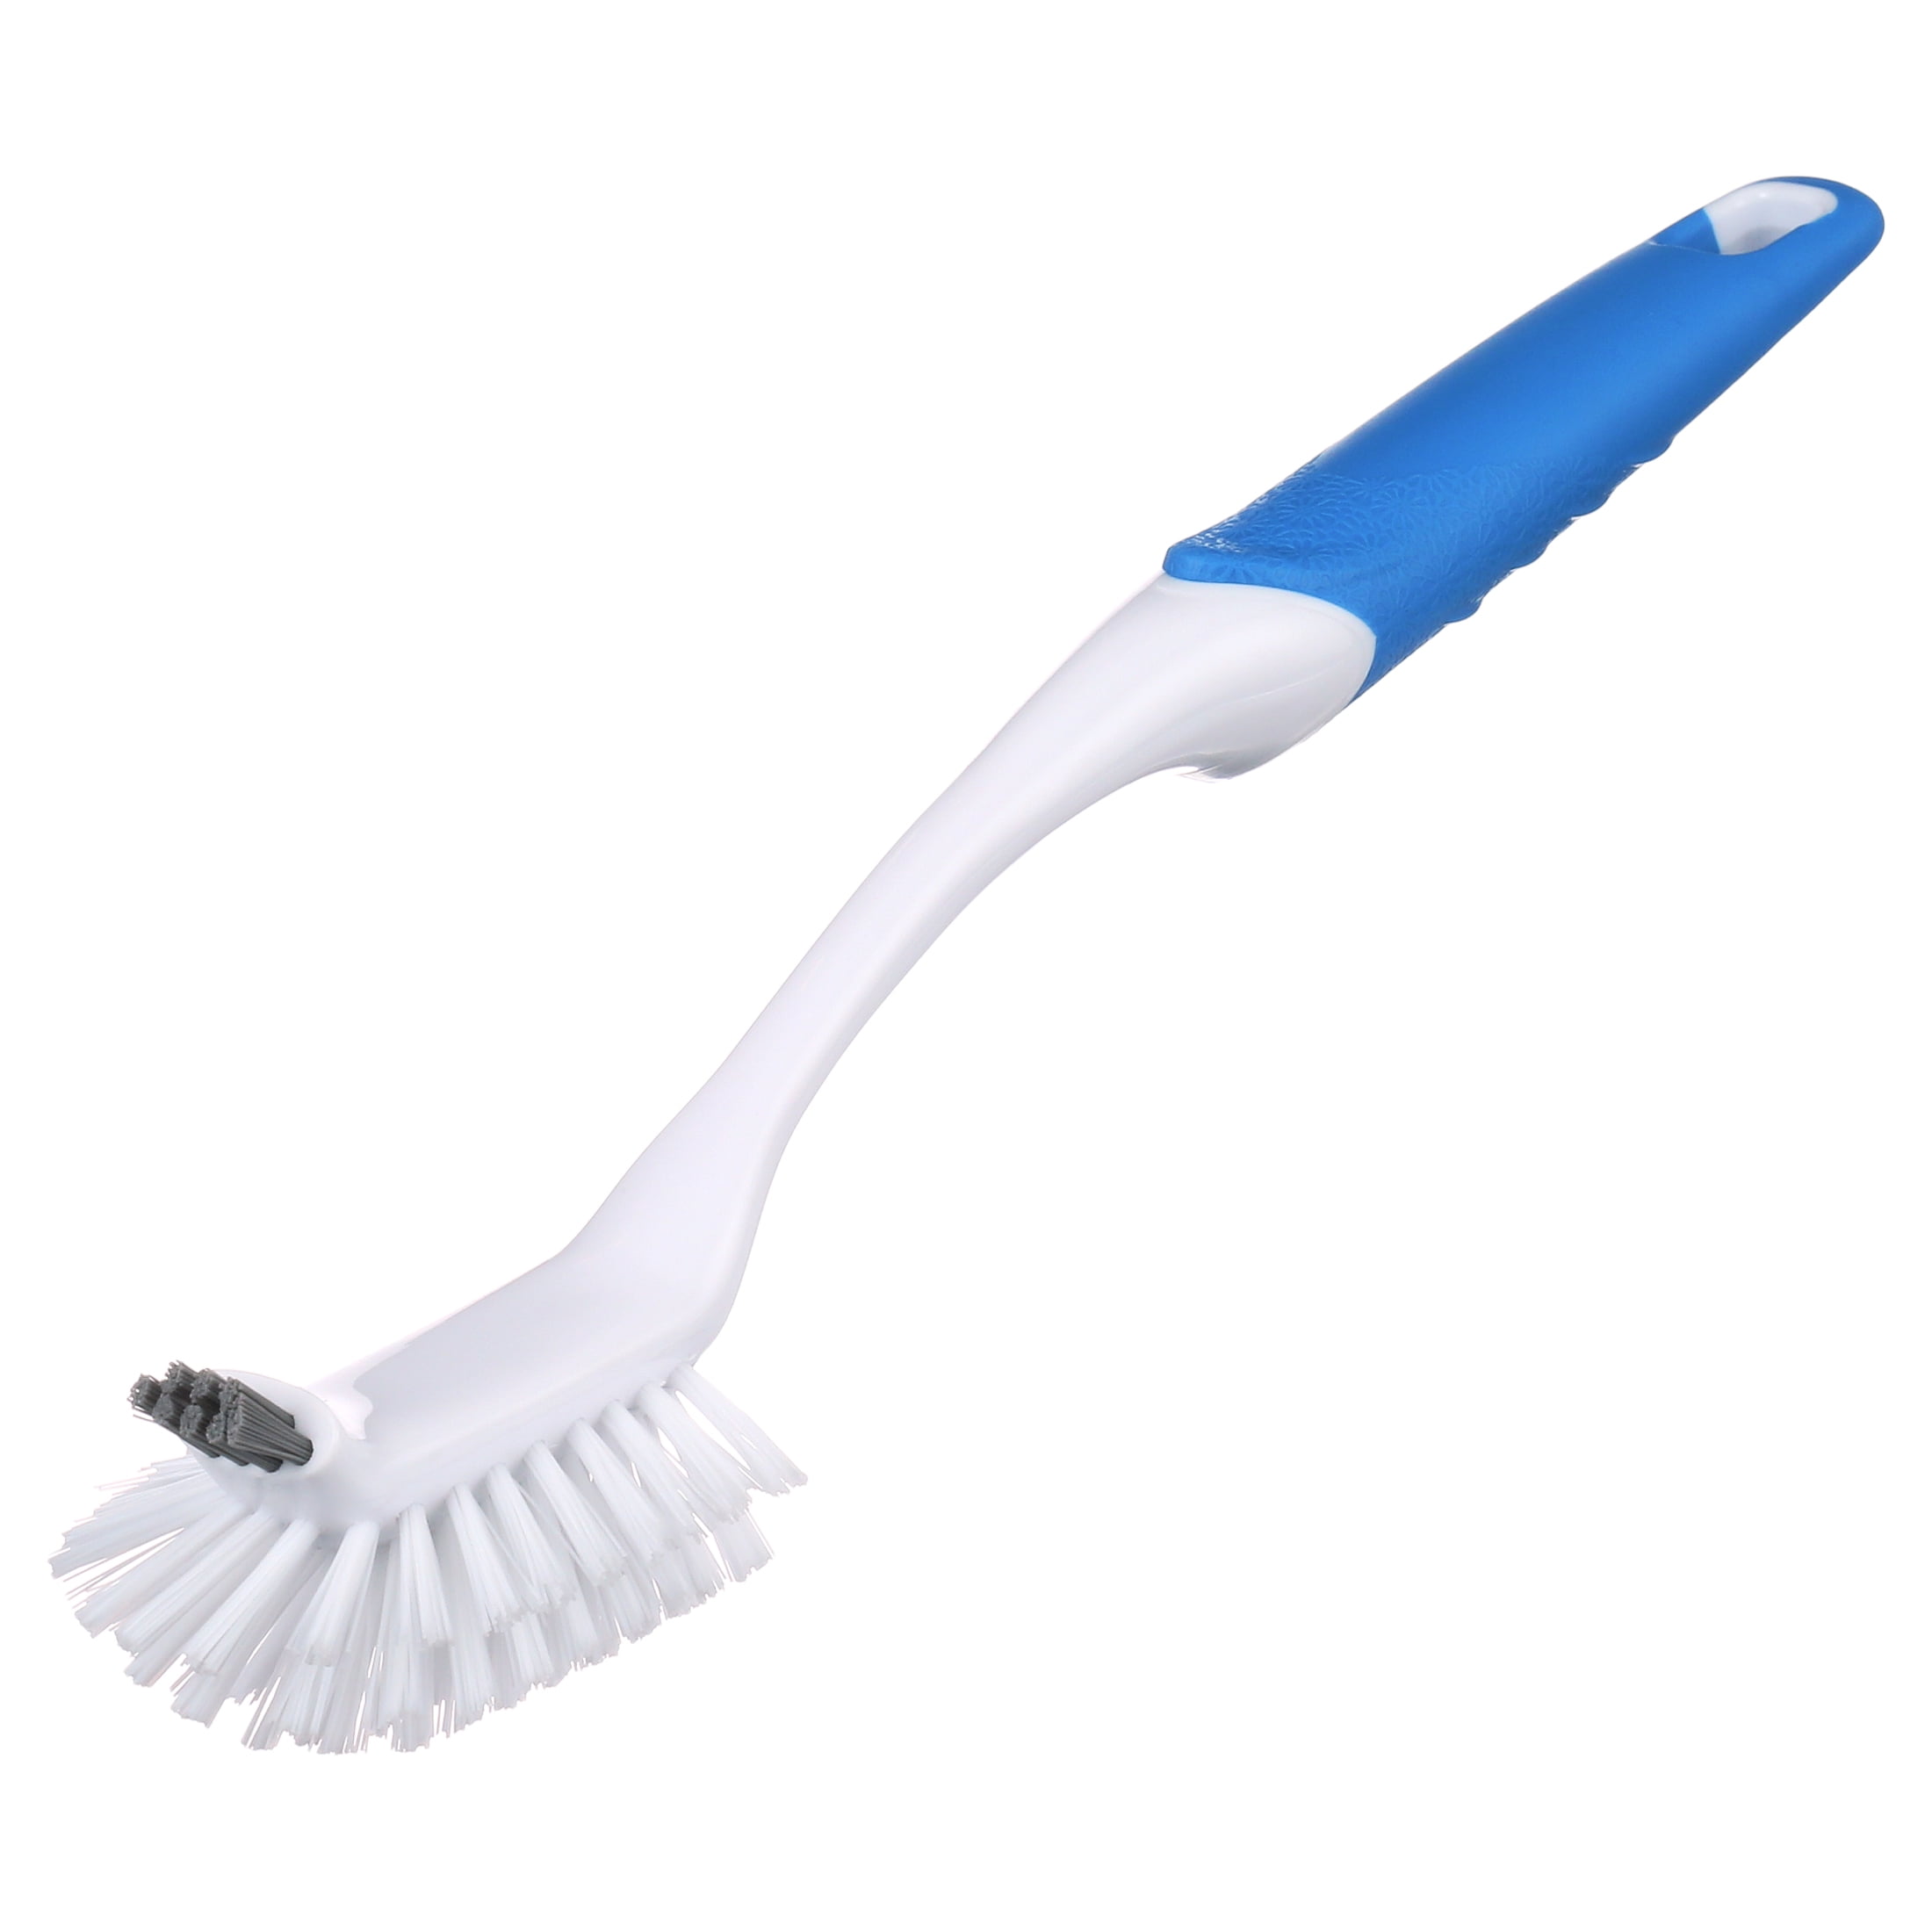 Cleaning Ball/ Only Long Handle/ Short Handle/ Pot Brush - Multi-functional  Kitchen Cleaning Brush, Dishwashing Brush, Durable Kitchen Scrub Brush,  Kitchen Sink Countertop Scrub Brush, Cleaning Supplies, Cleaning Tool,  Ready For School 